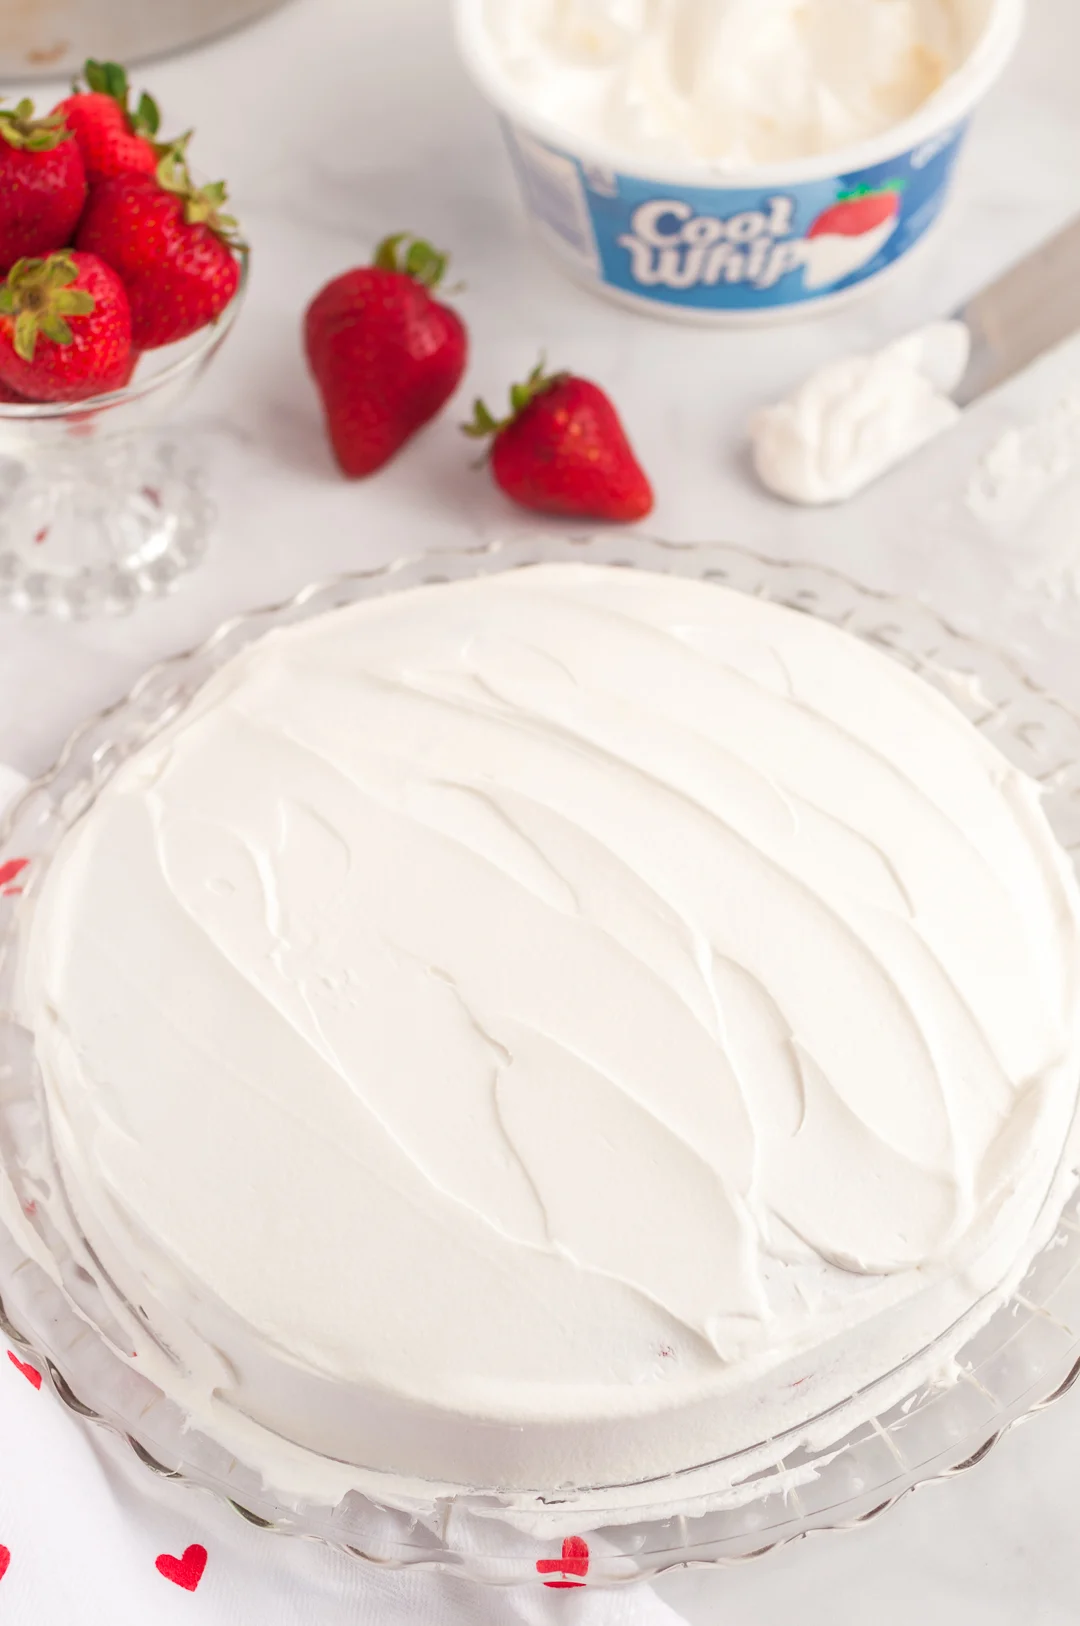 Cool Whip spread onto cake